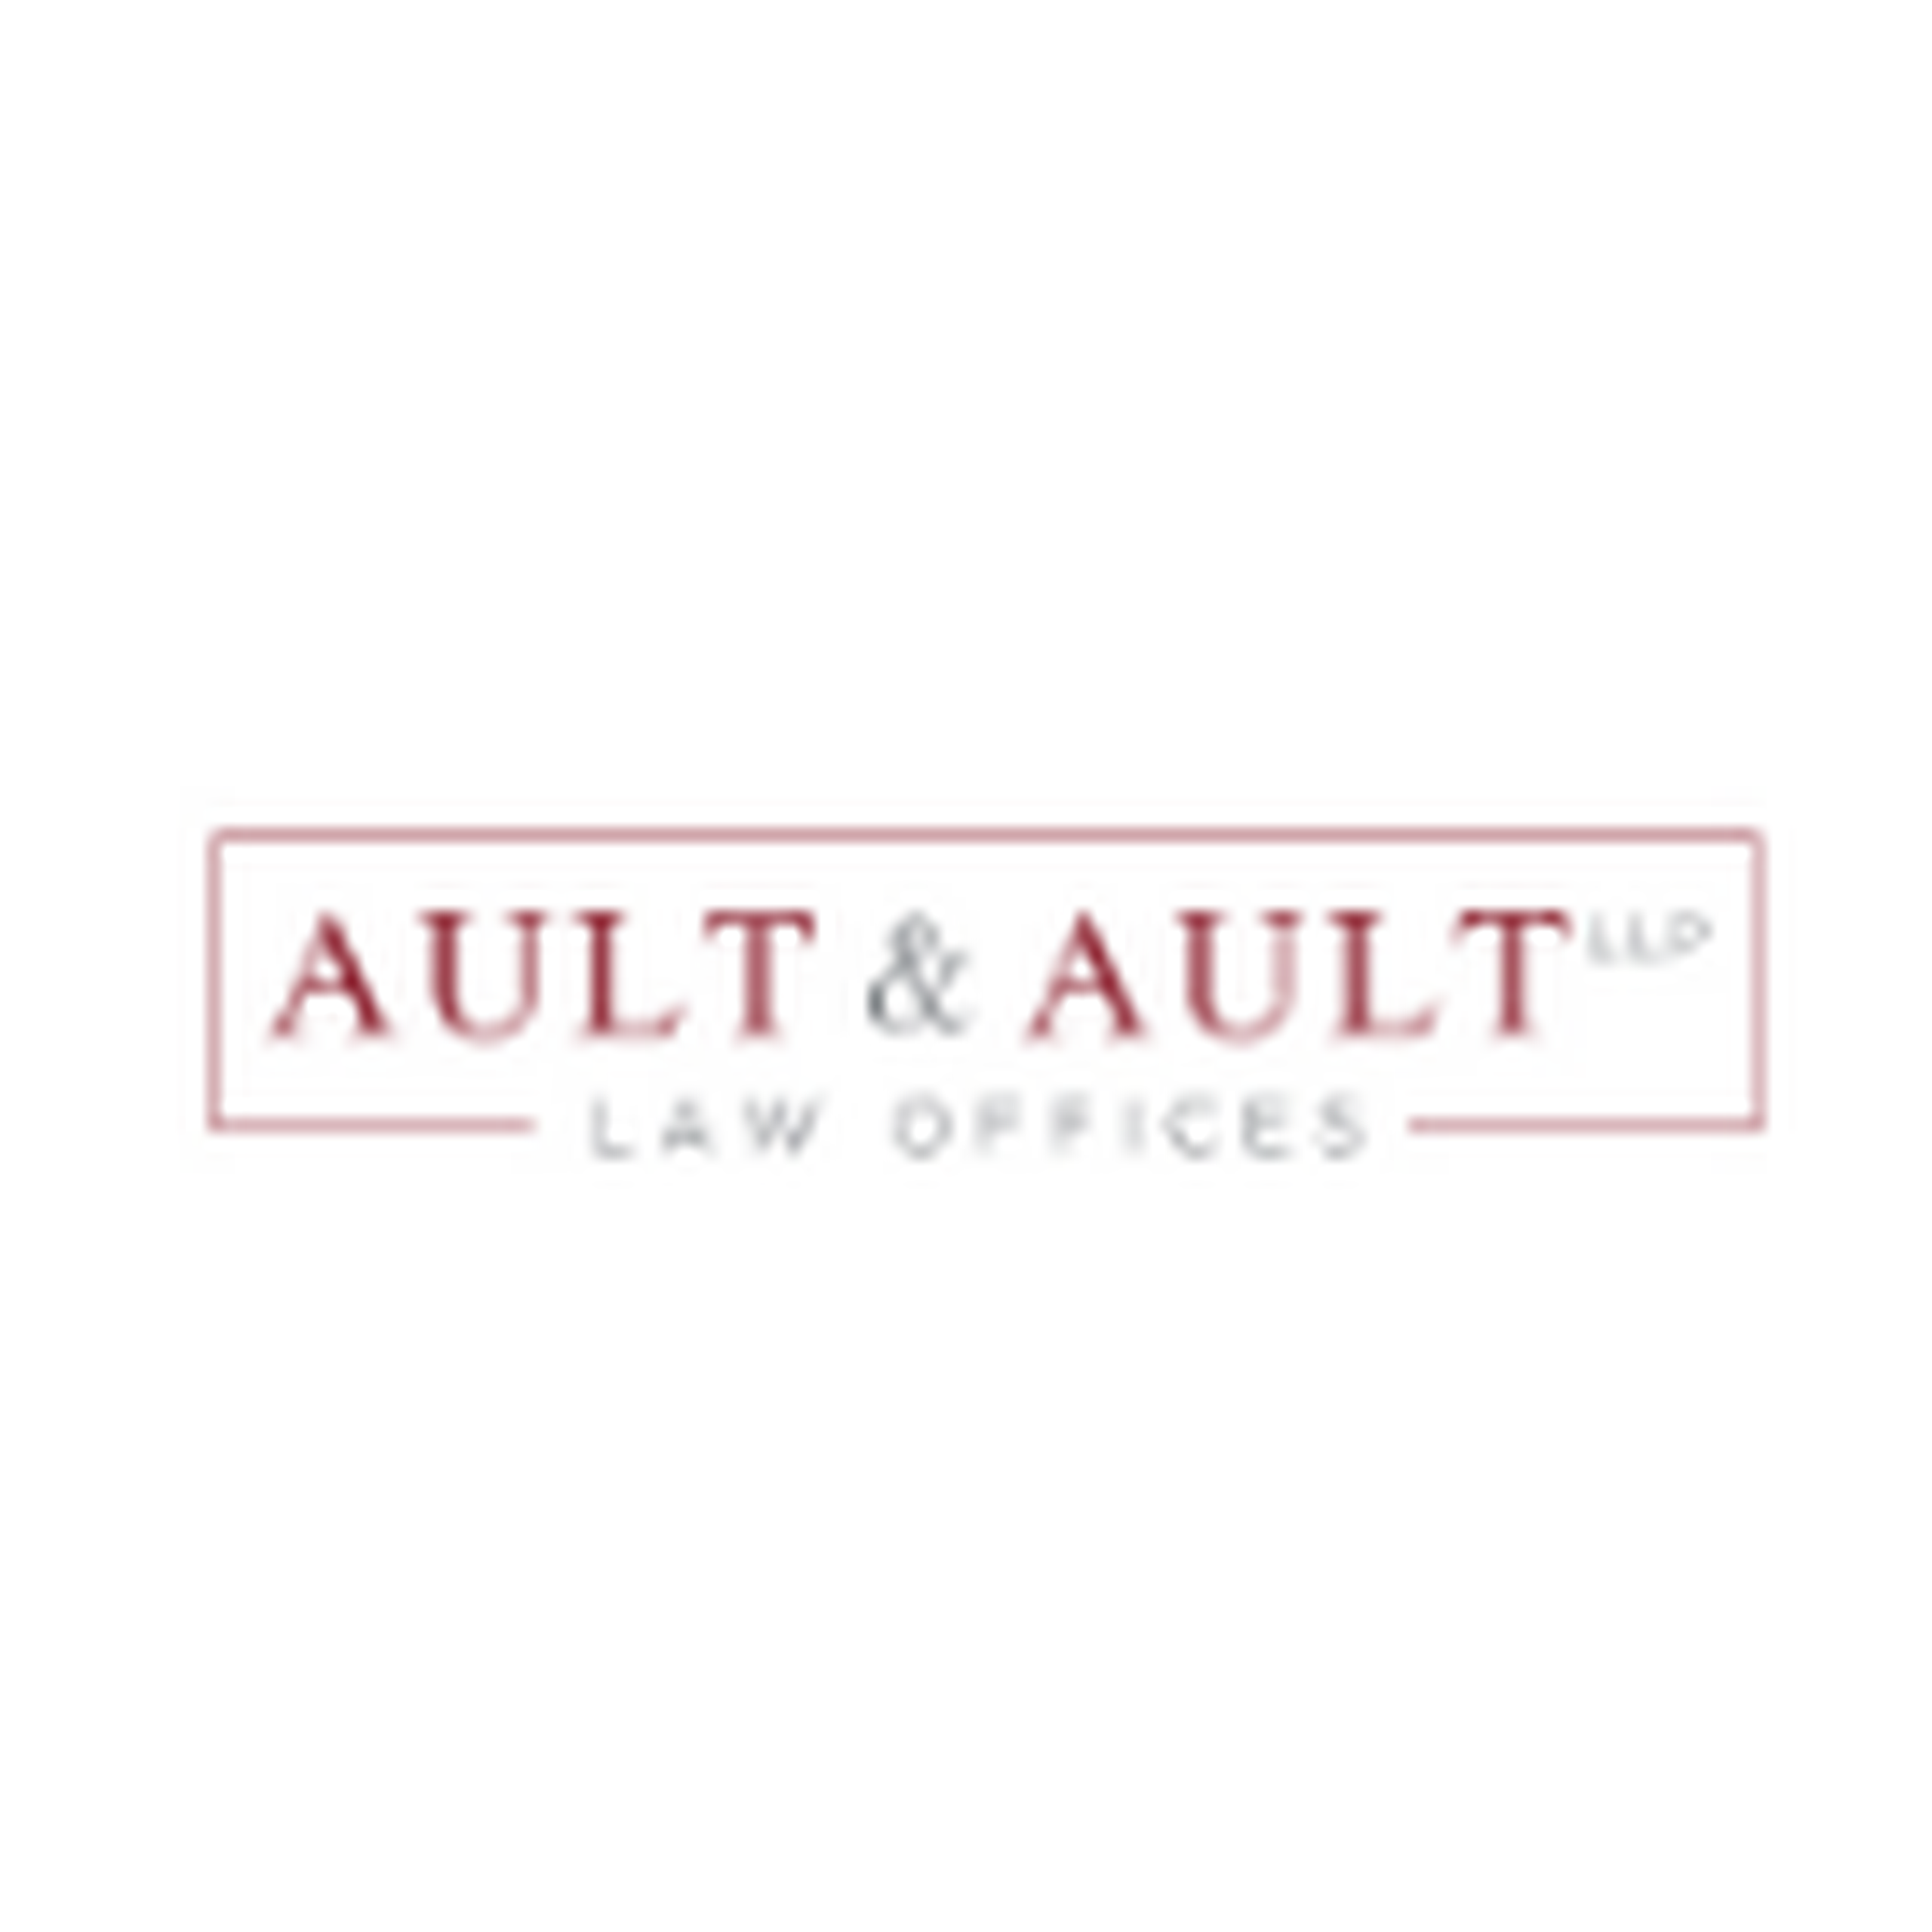 Elizabeth Howarth, Office Administrator/Accounting/Estate Planning Assistant at Ault & Ault LLP - Testimonial